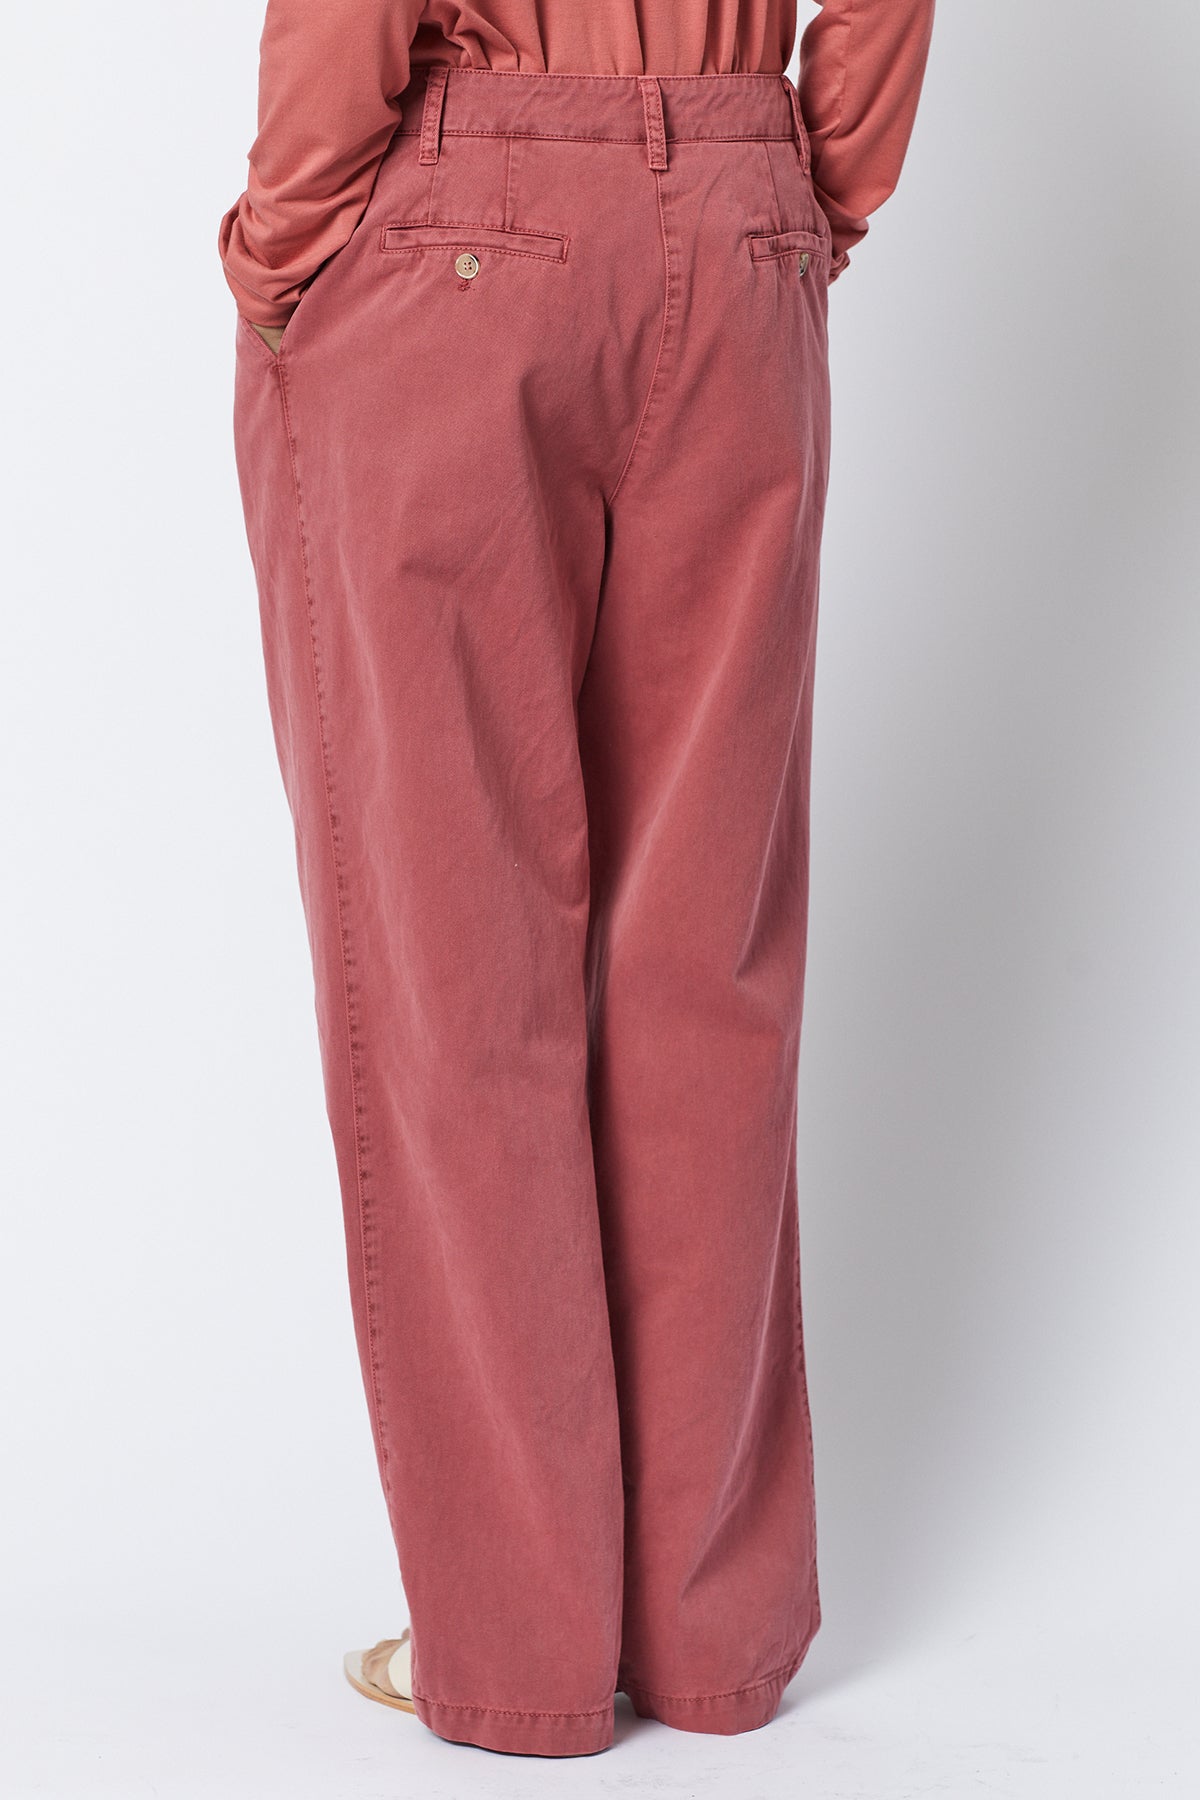 Temescal Pant in femme back-26007132143809